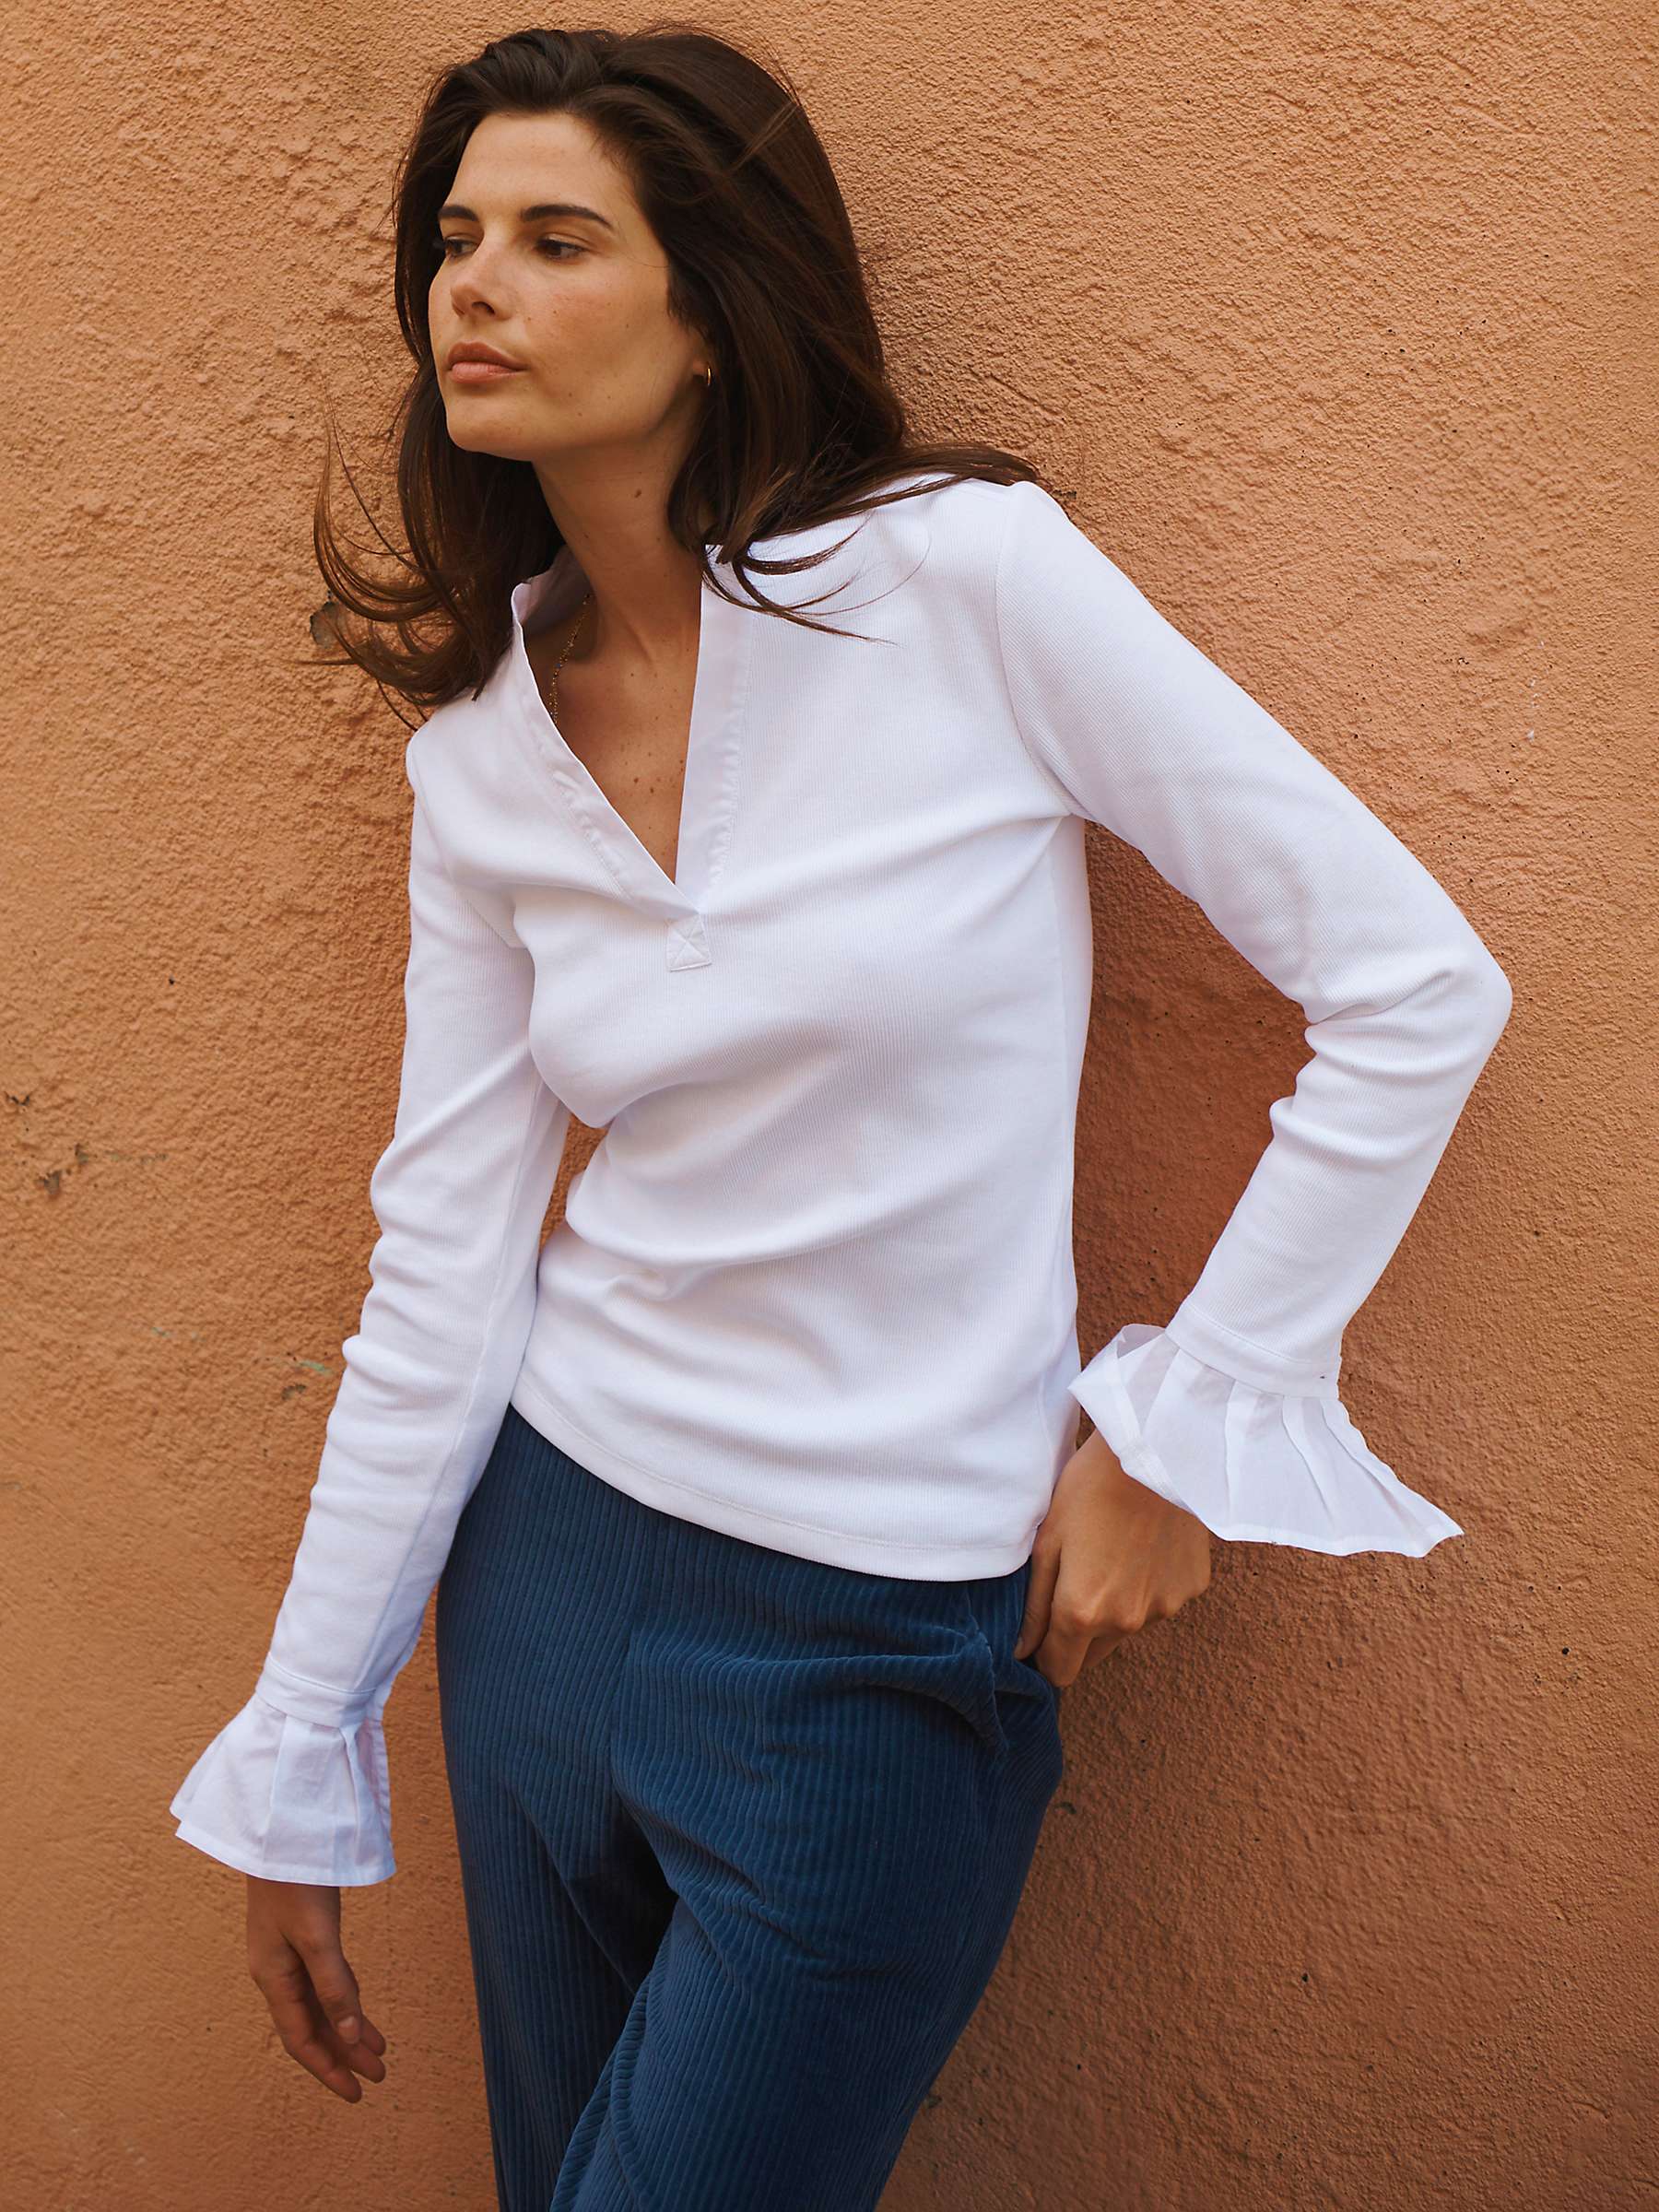 NRBY Eden Plain Jersey Top, White at John Lewis & Partners